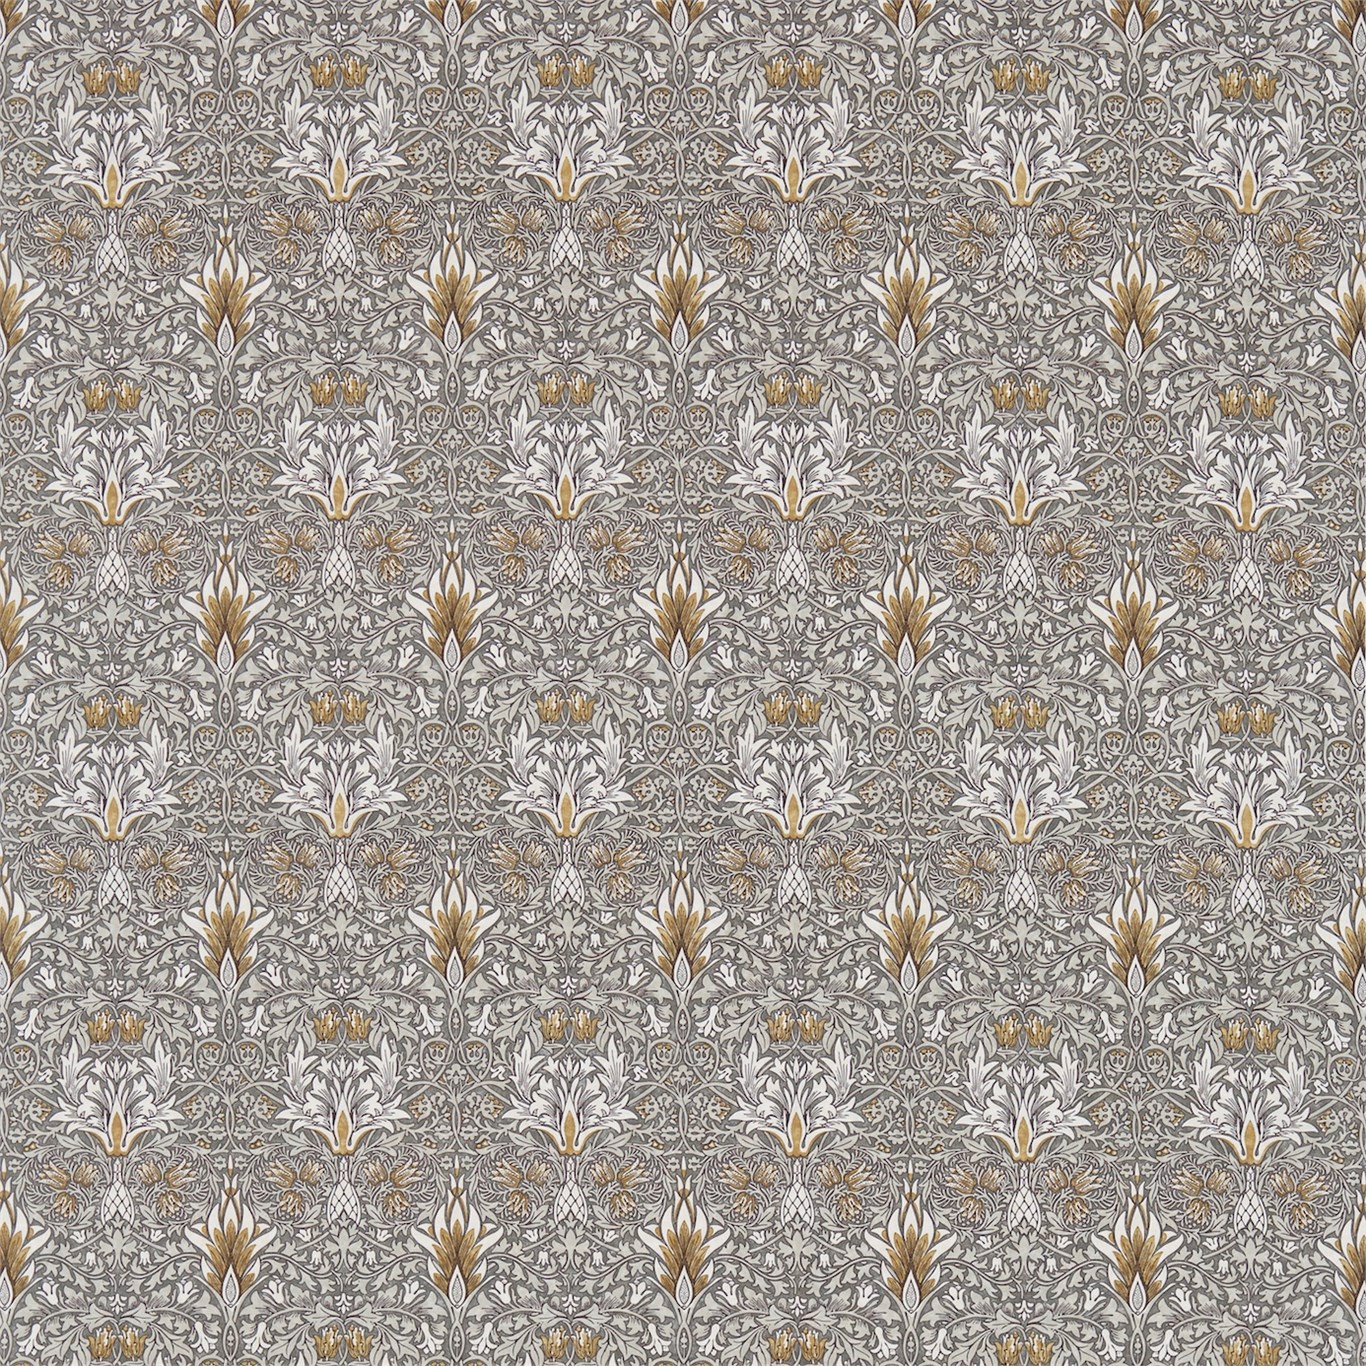 Snakeshead Pewter/Gold Fabric by MOR